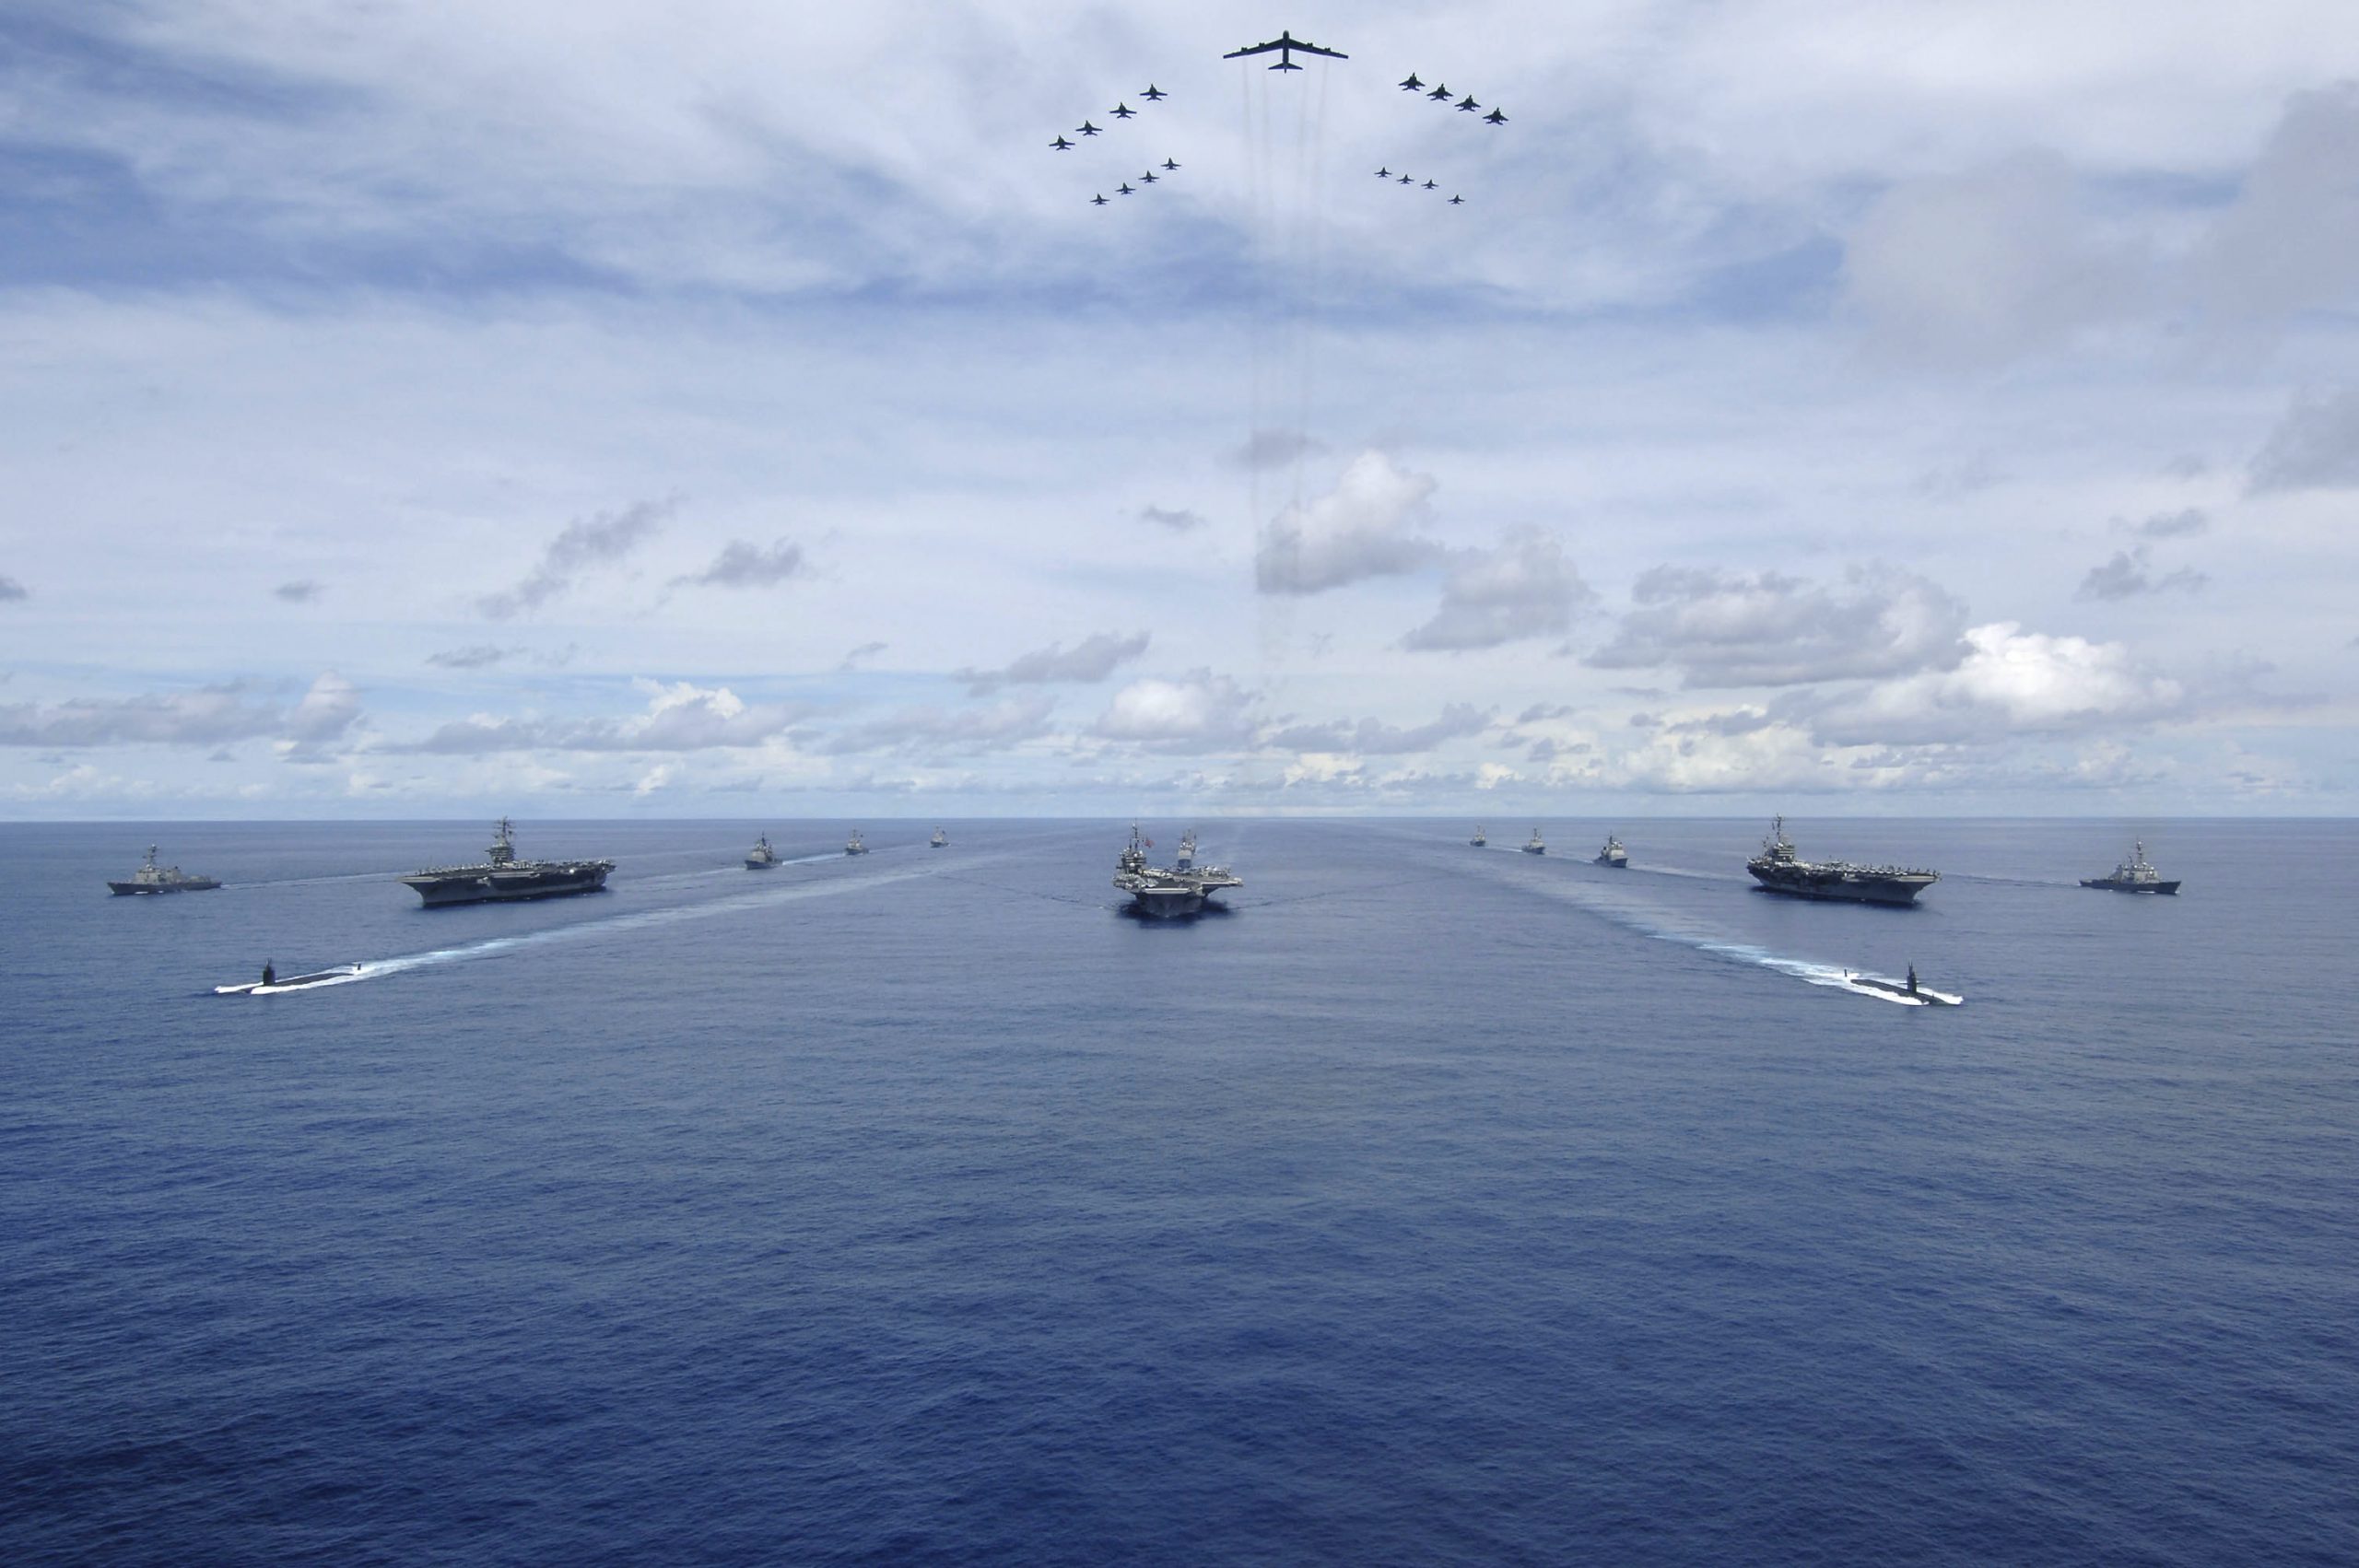 PACIFIC OCEAN (Aug.14, 2007) - USS Nimitz (CVN 68), USS Kitty Hawk (CV 63) and USS John C. Stennis (CVN 74) Carrier Strike Groups transit in formation during a joint photo exercise (PHOTOEX) during exercise Valiant Shield 2007. The aerial formation consists of aircraft from the carrier strike groups as well as Air Force aircraft. The strike groups are participating in Valiant Shield 2007, the largest joint exercise in the Pacific this year. Held in the Guam operating area, the exercise includes 30 ships, more than 280 aircraft and more than 20,000 service members from the Navy, Air Force, Marine Corps, and Coast Guard. U.S. Navy photo by Mass Communication Specialist Seaman Stephen W. Rowe. -